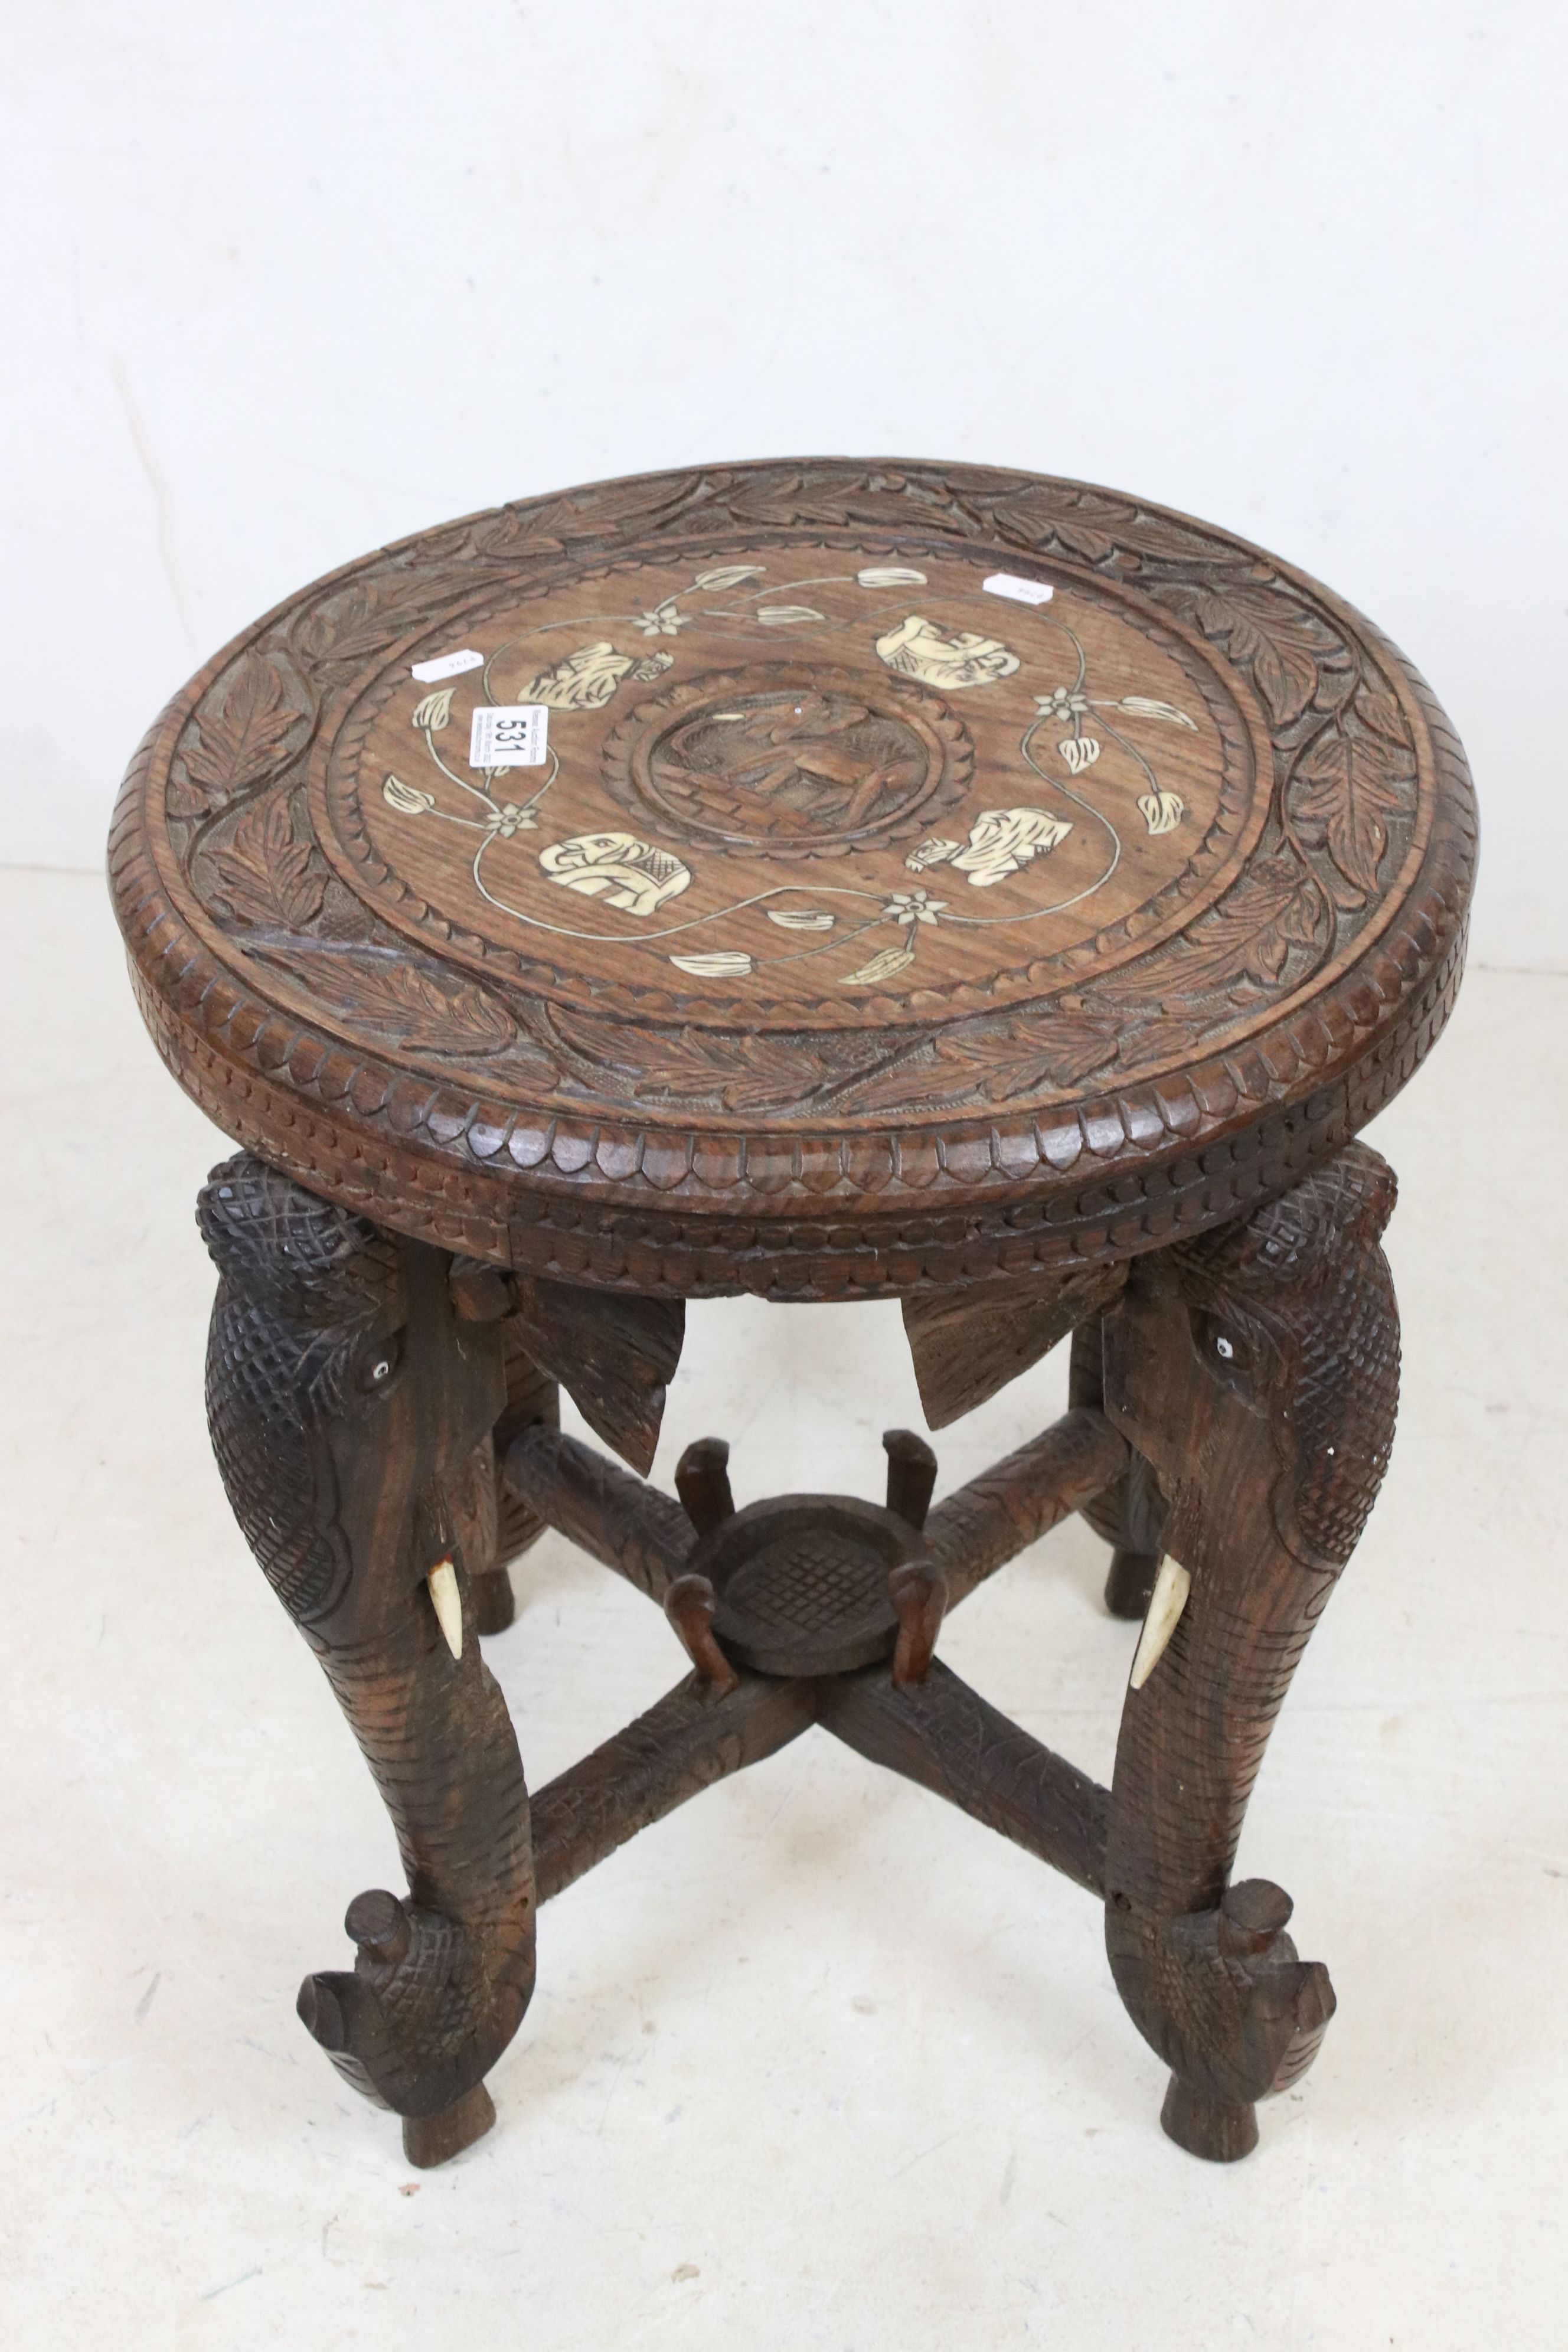 Indian Hardwood Circular Table with bone inlay, the four legs carved in the form of Elephant Heads